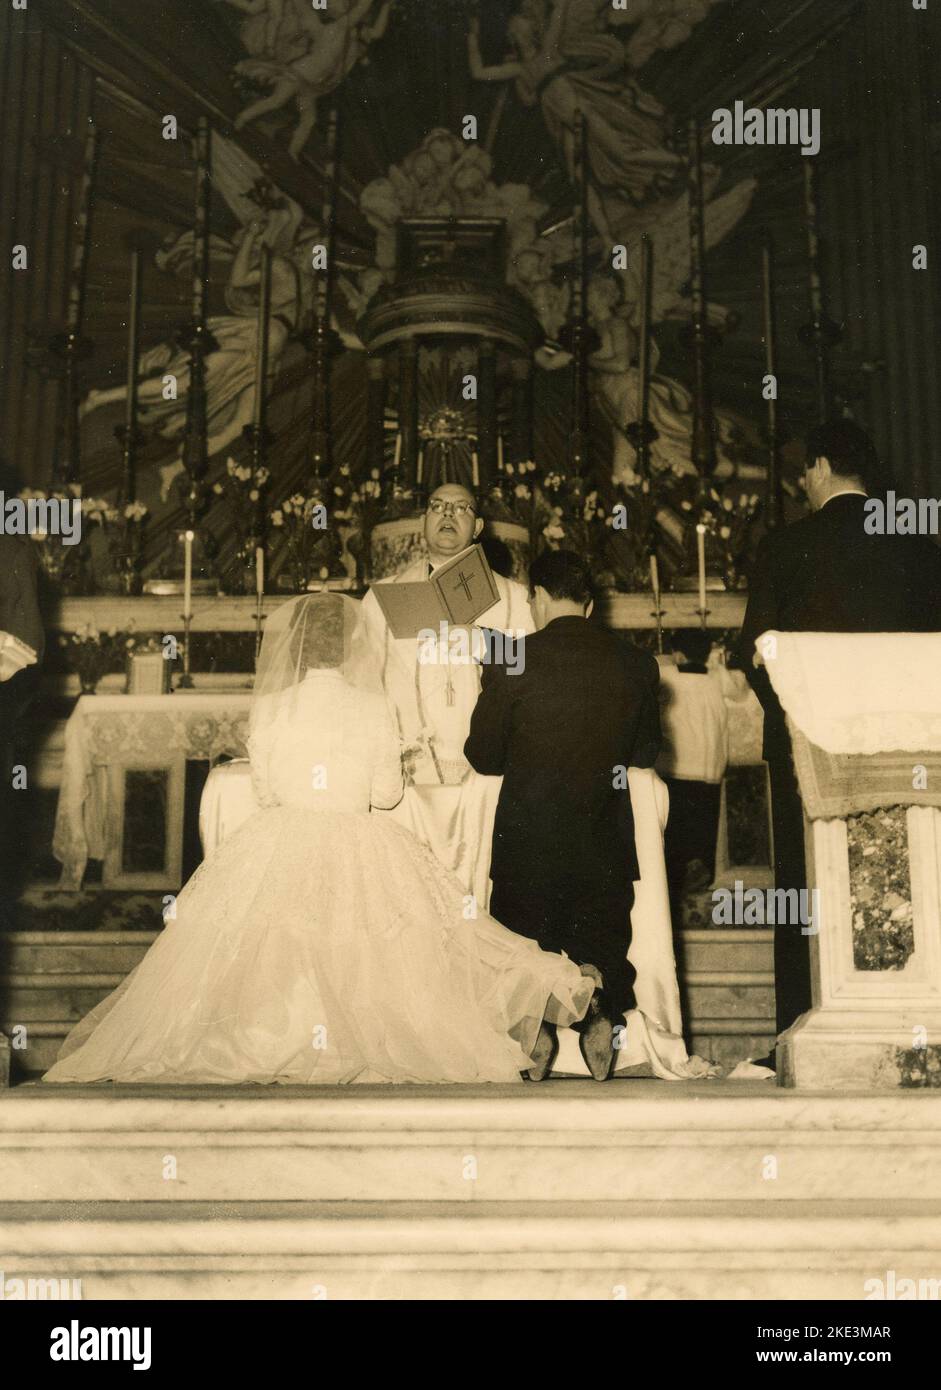 Wedding in a village in central Italy: The Bride and the Groom in the church in front of the priest, 1950s Stock Photo